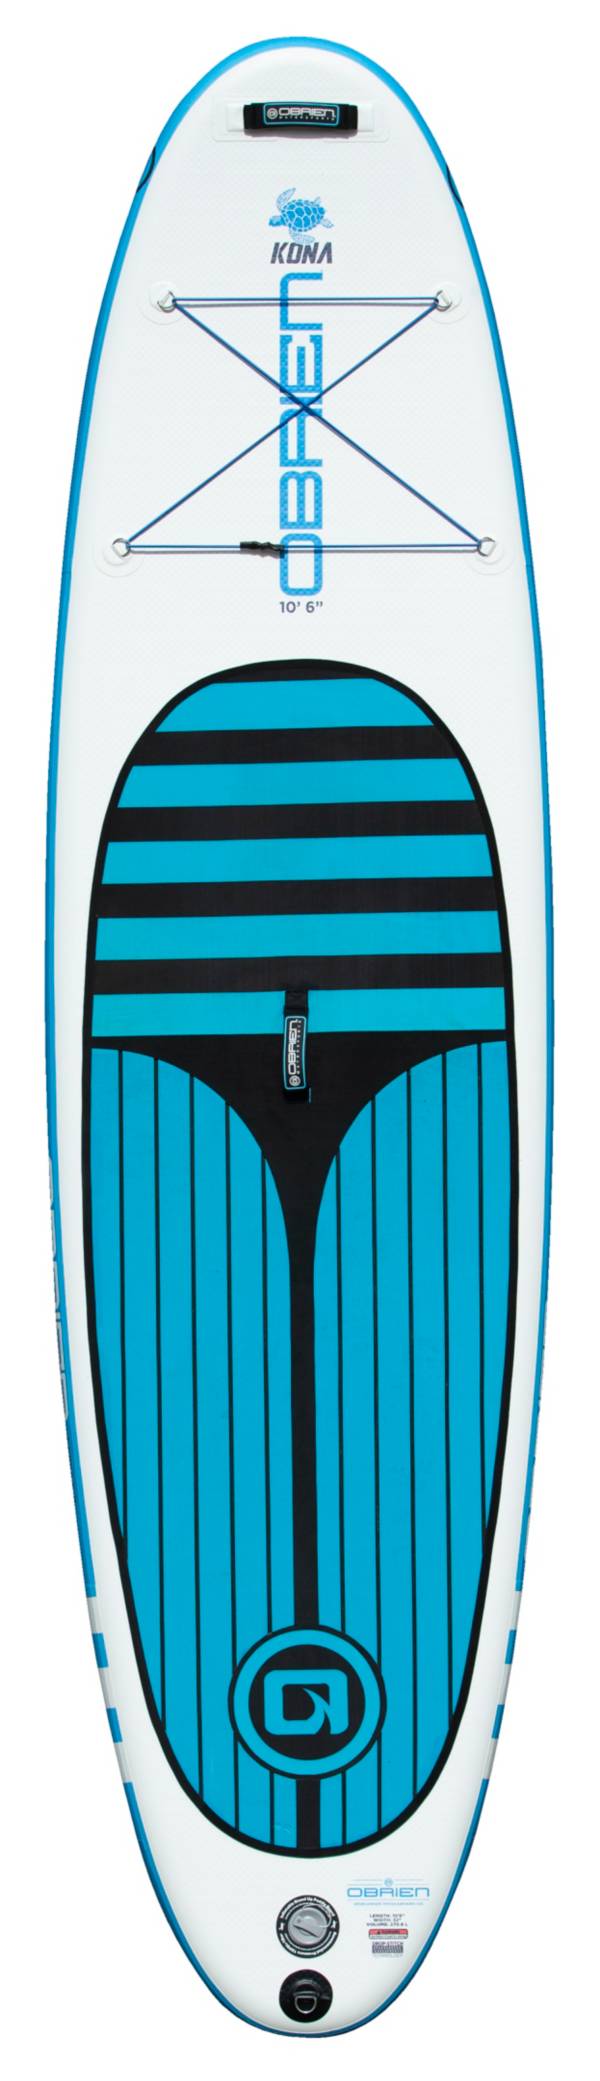 O'Brien Kona Inflatable Stand Up Paddle Board product image